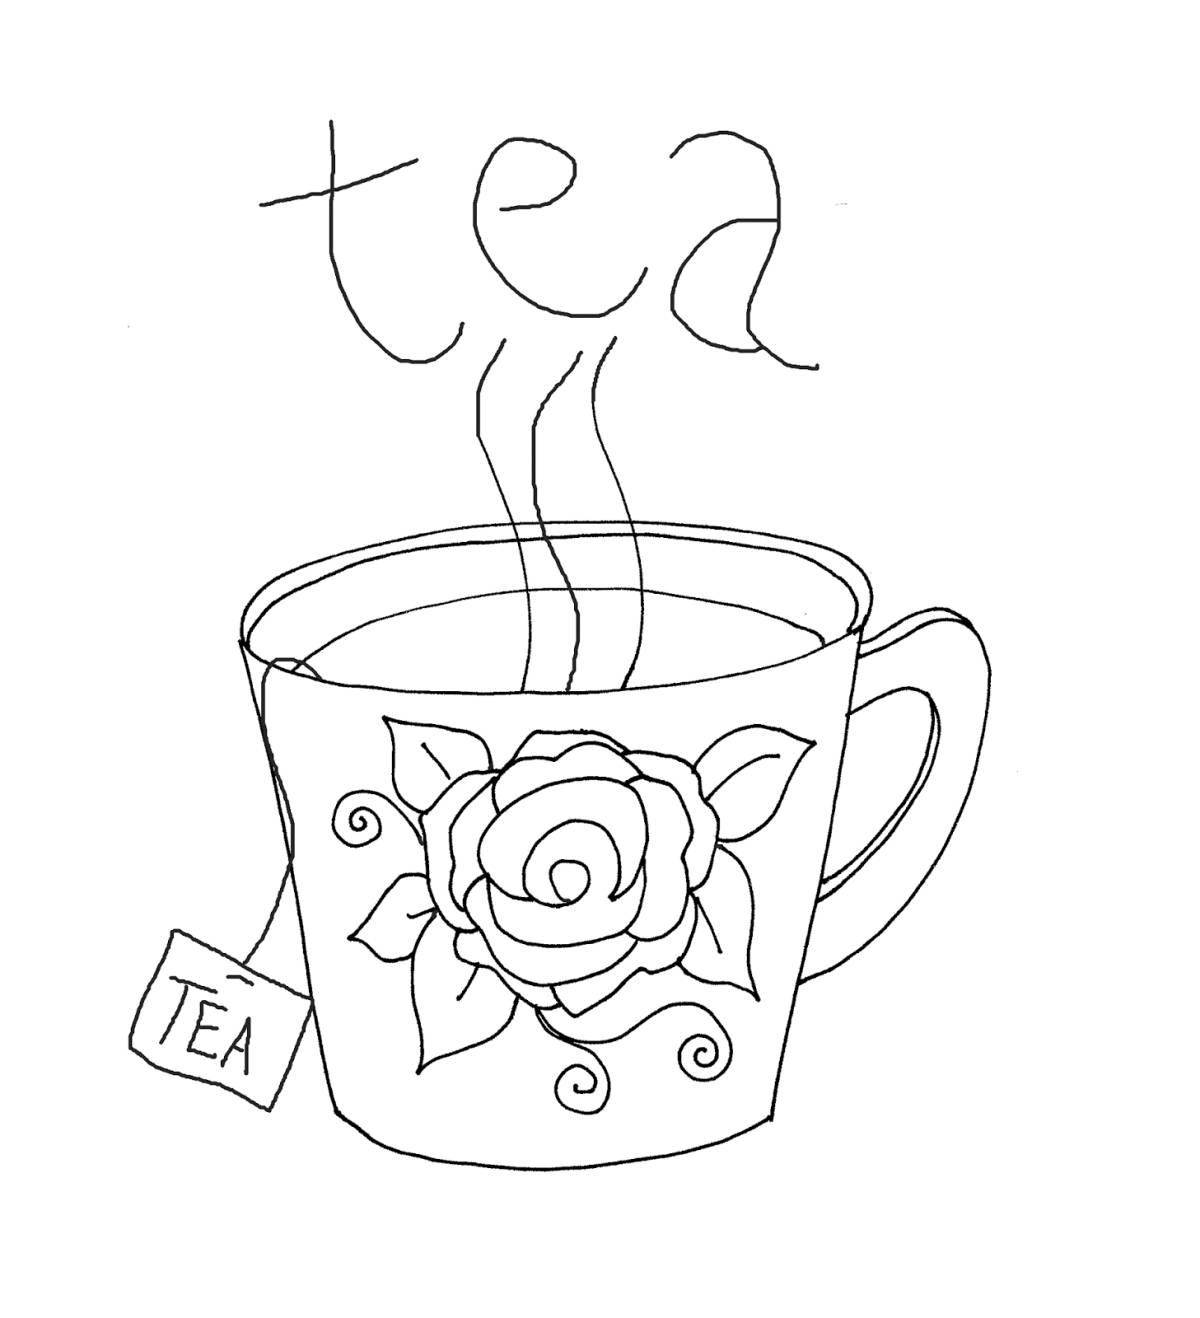 Fabulous teapot and cup coloring book for kids